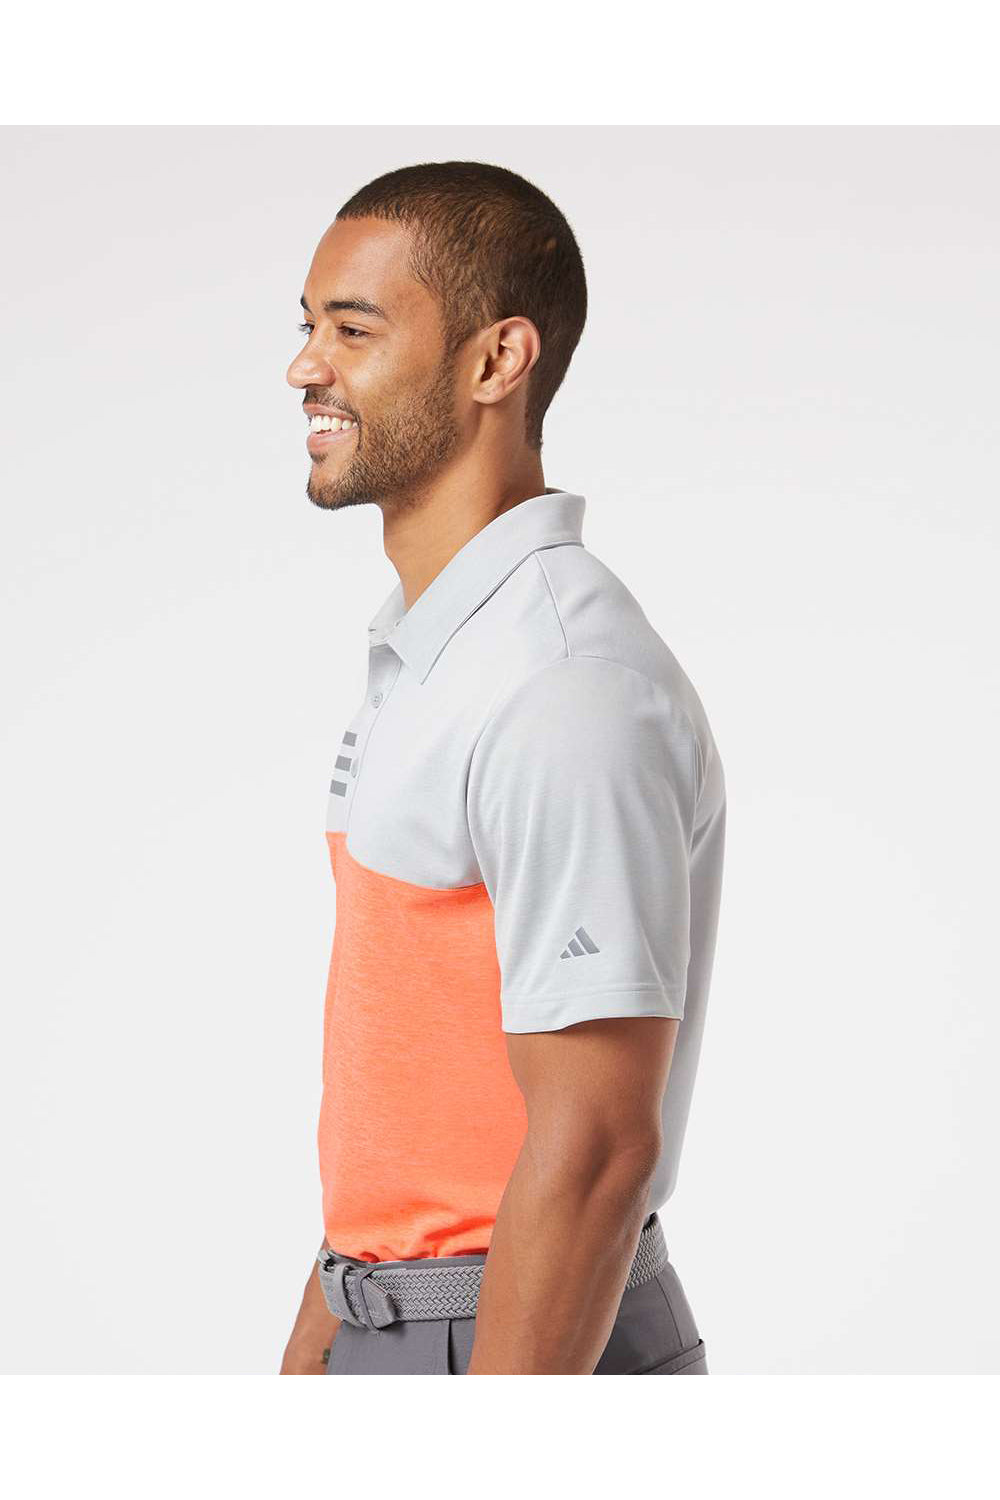 Adidas A508 Mens 3 Stripes Heathered Colorblocked Short Sleeve Polo Shirt Heather Grey/Heather Coral Model Side